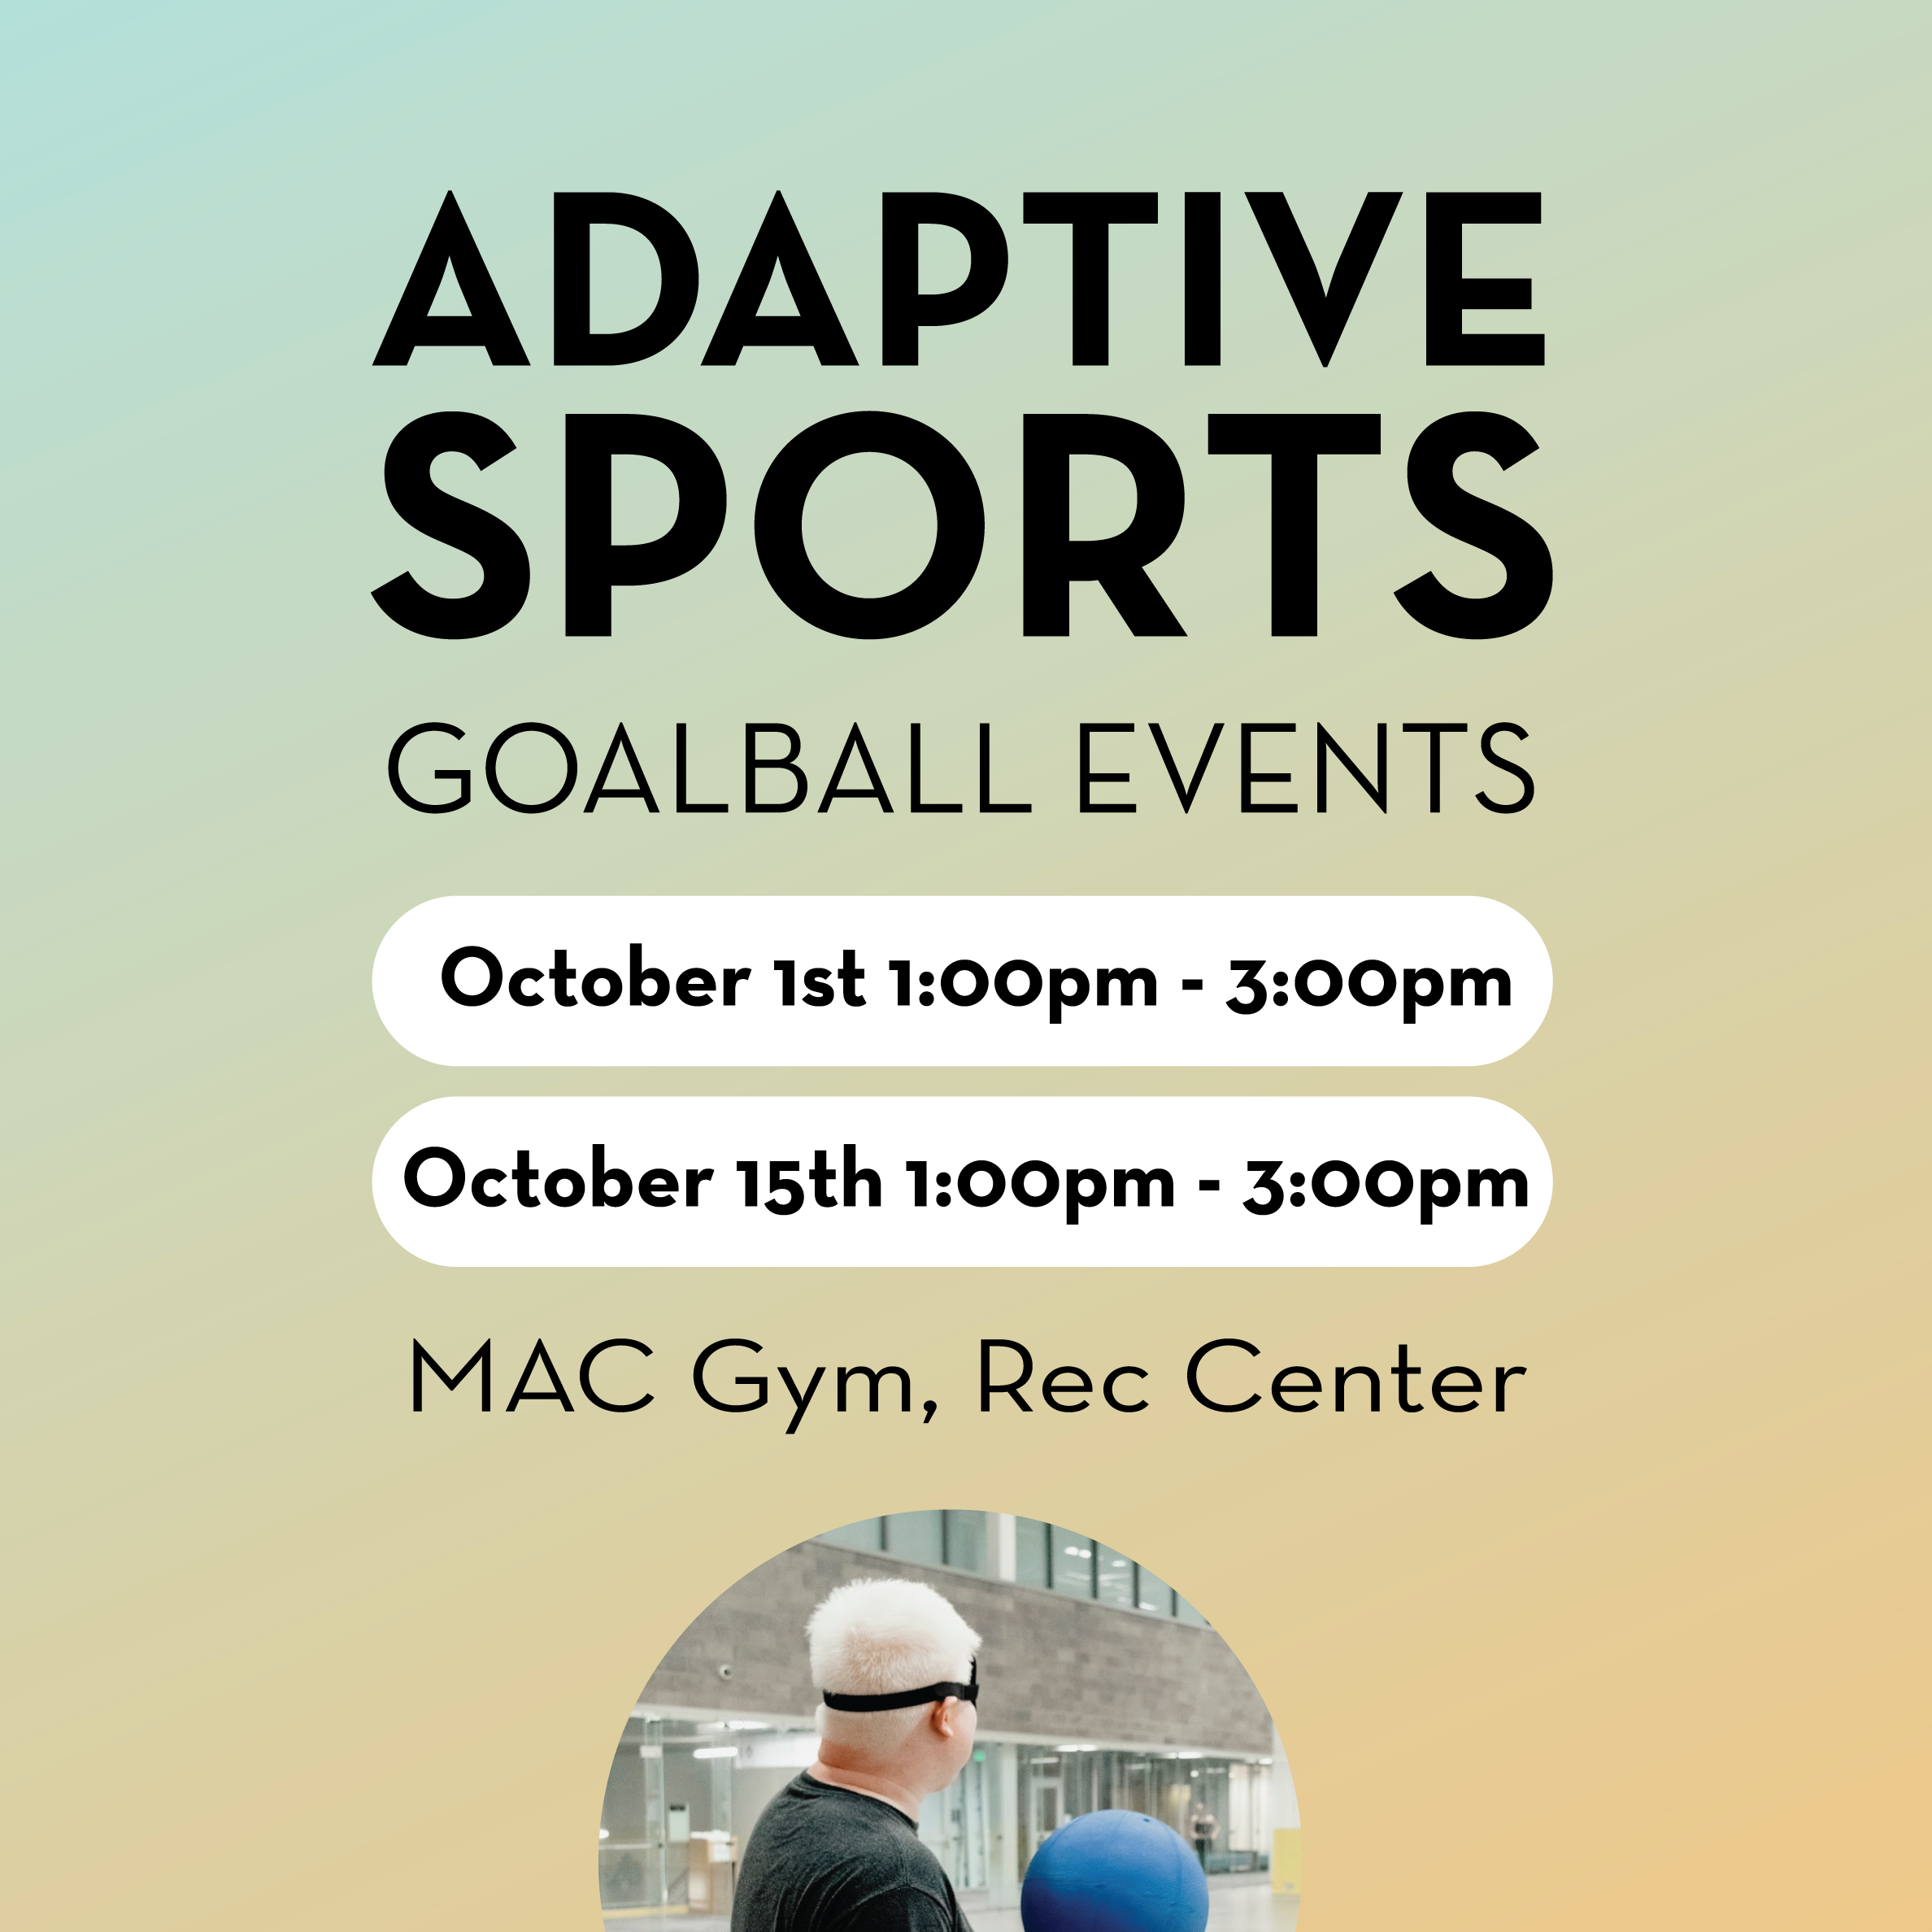 gradient background with the text "adaptive sports: goalball events: October 1st from 1-3pm, October 15th from 1-3 pm: MAC Gym